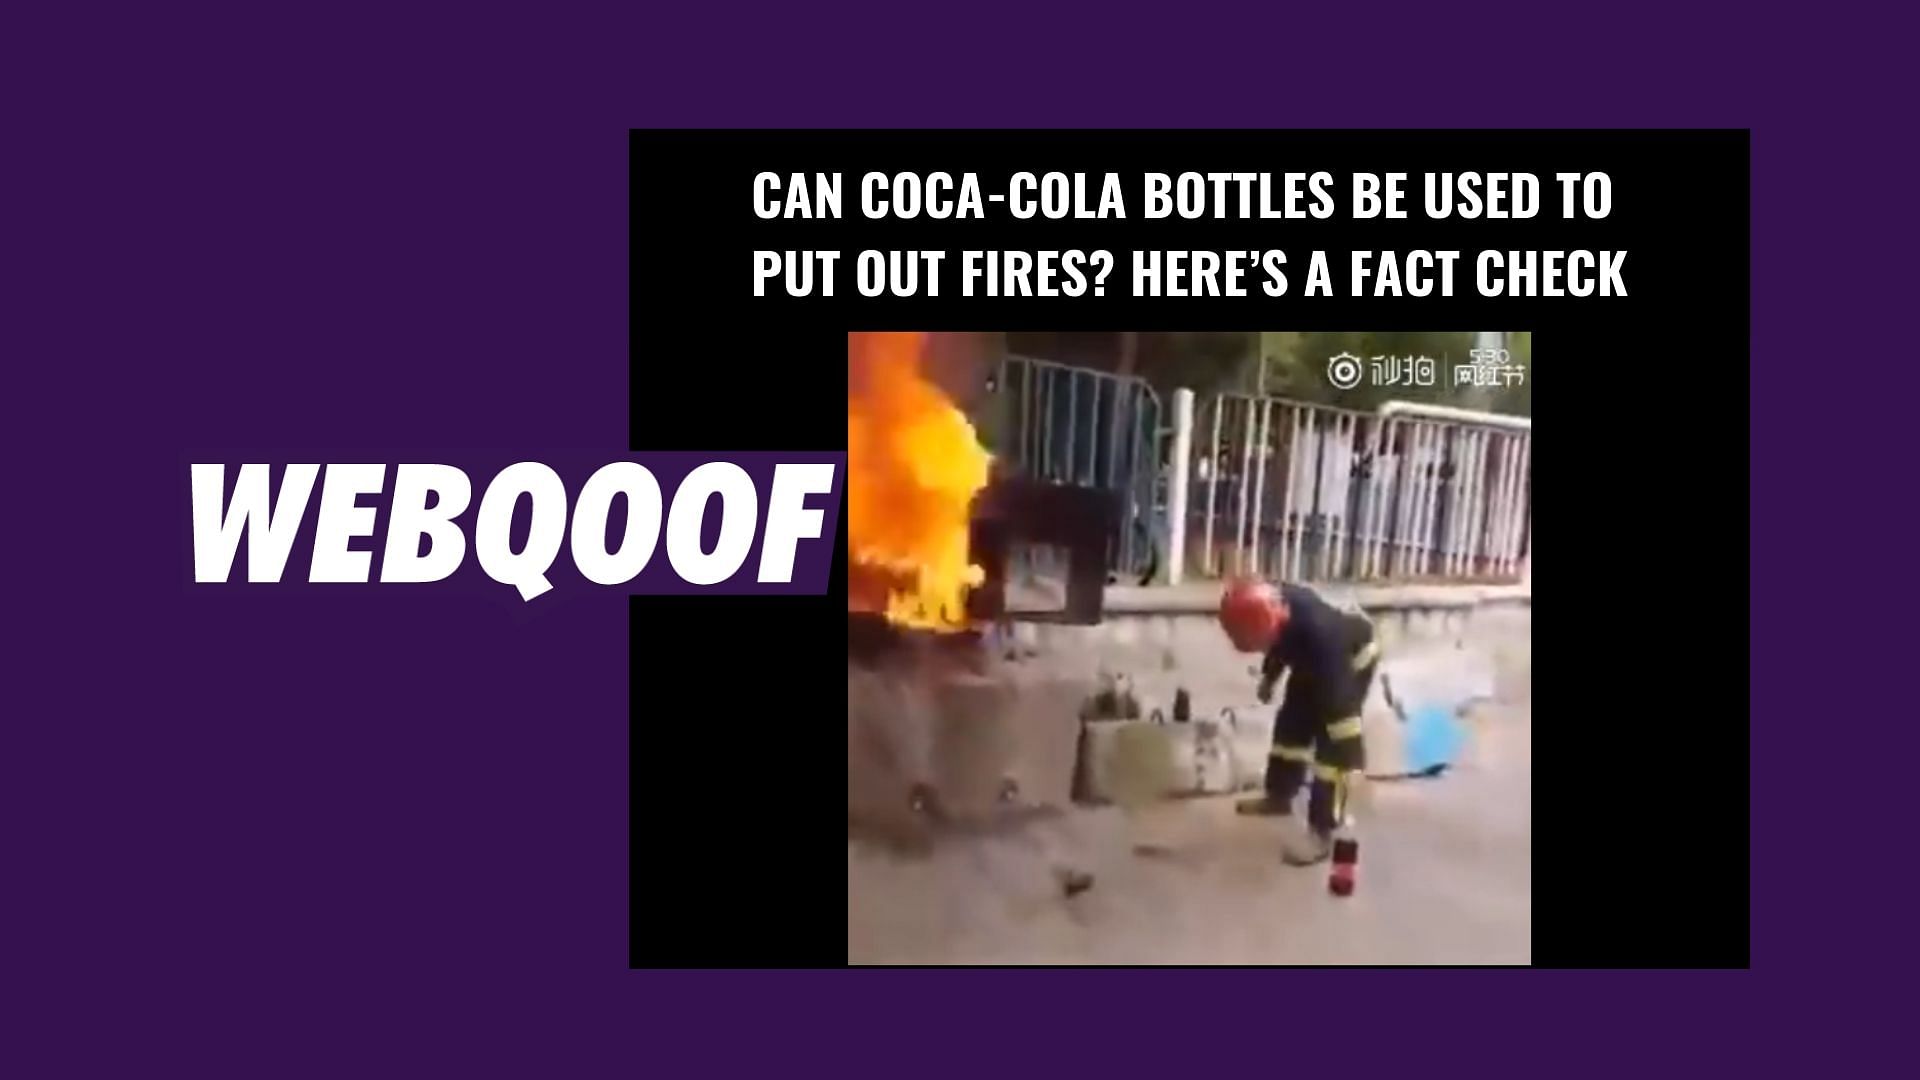 A video showing a fireman putting out a fire with Coca-Cola bottles has gone viral on social media.&nbsp;